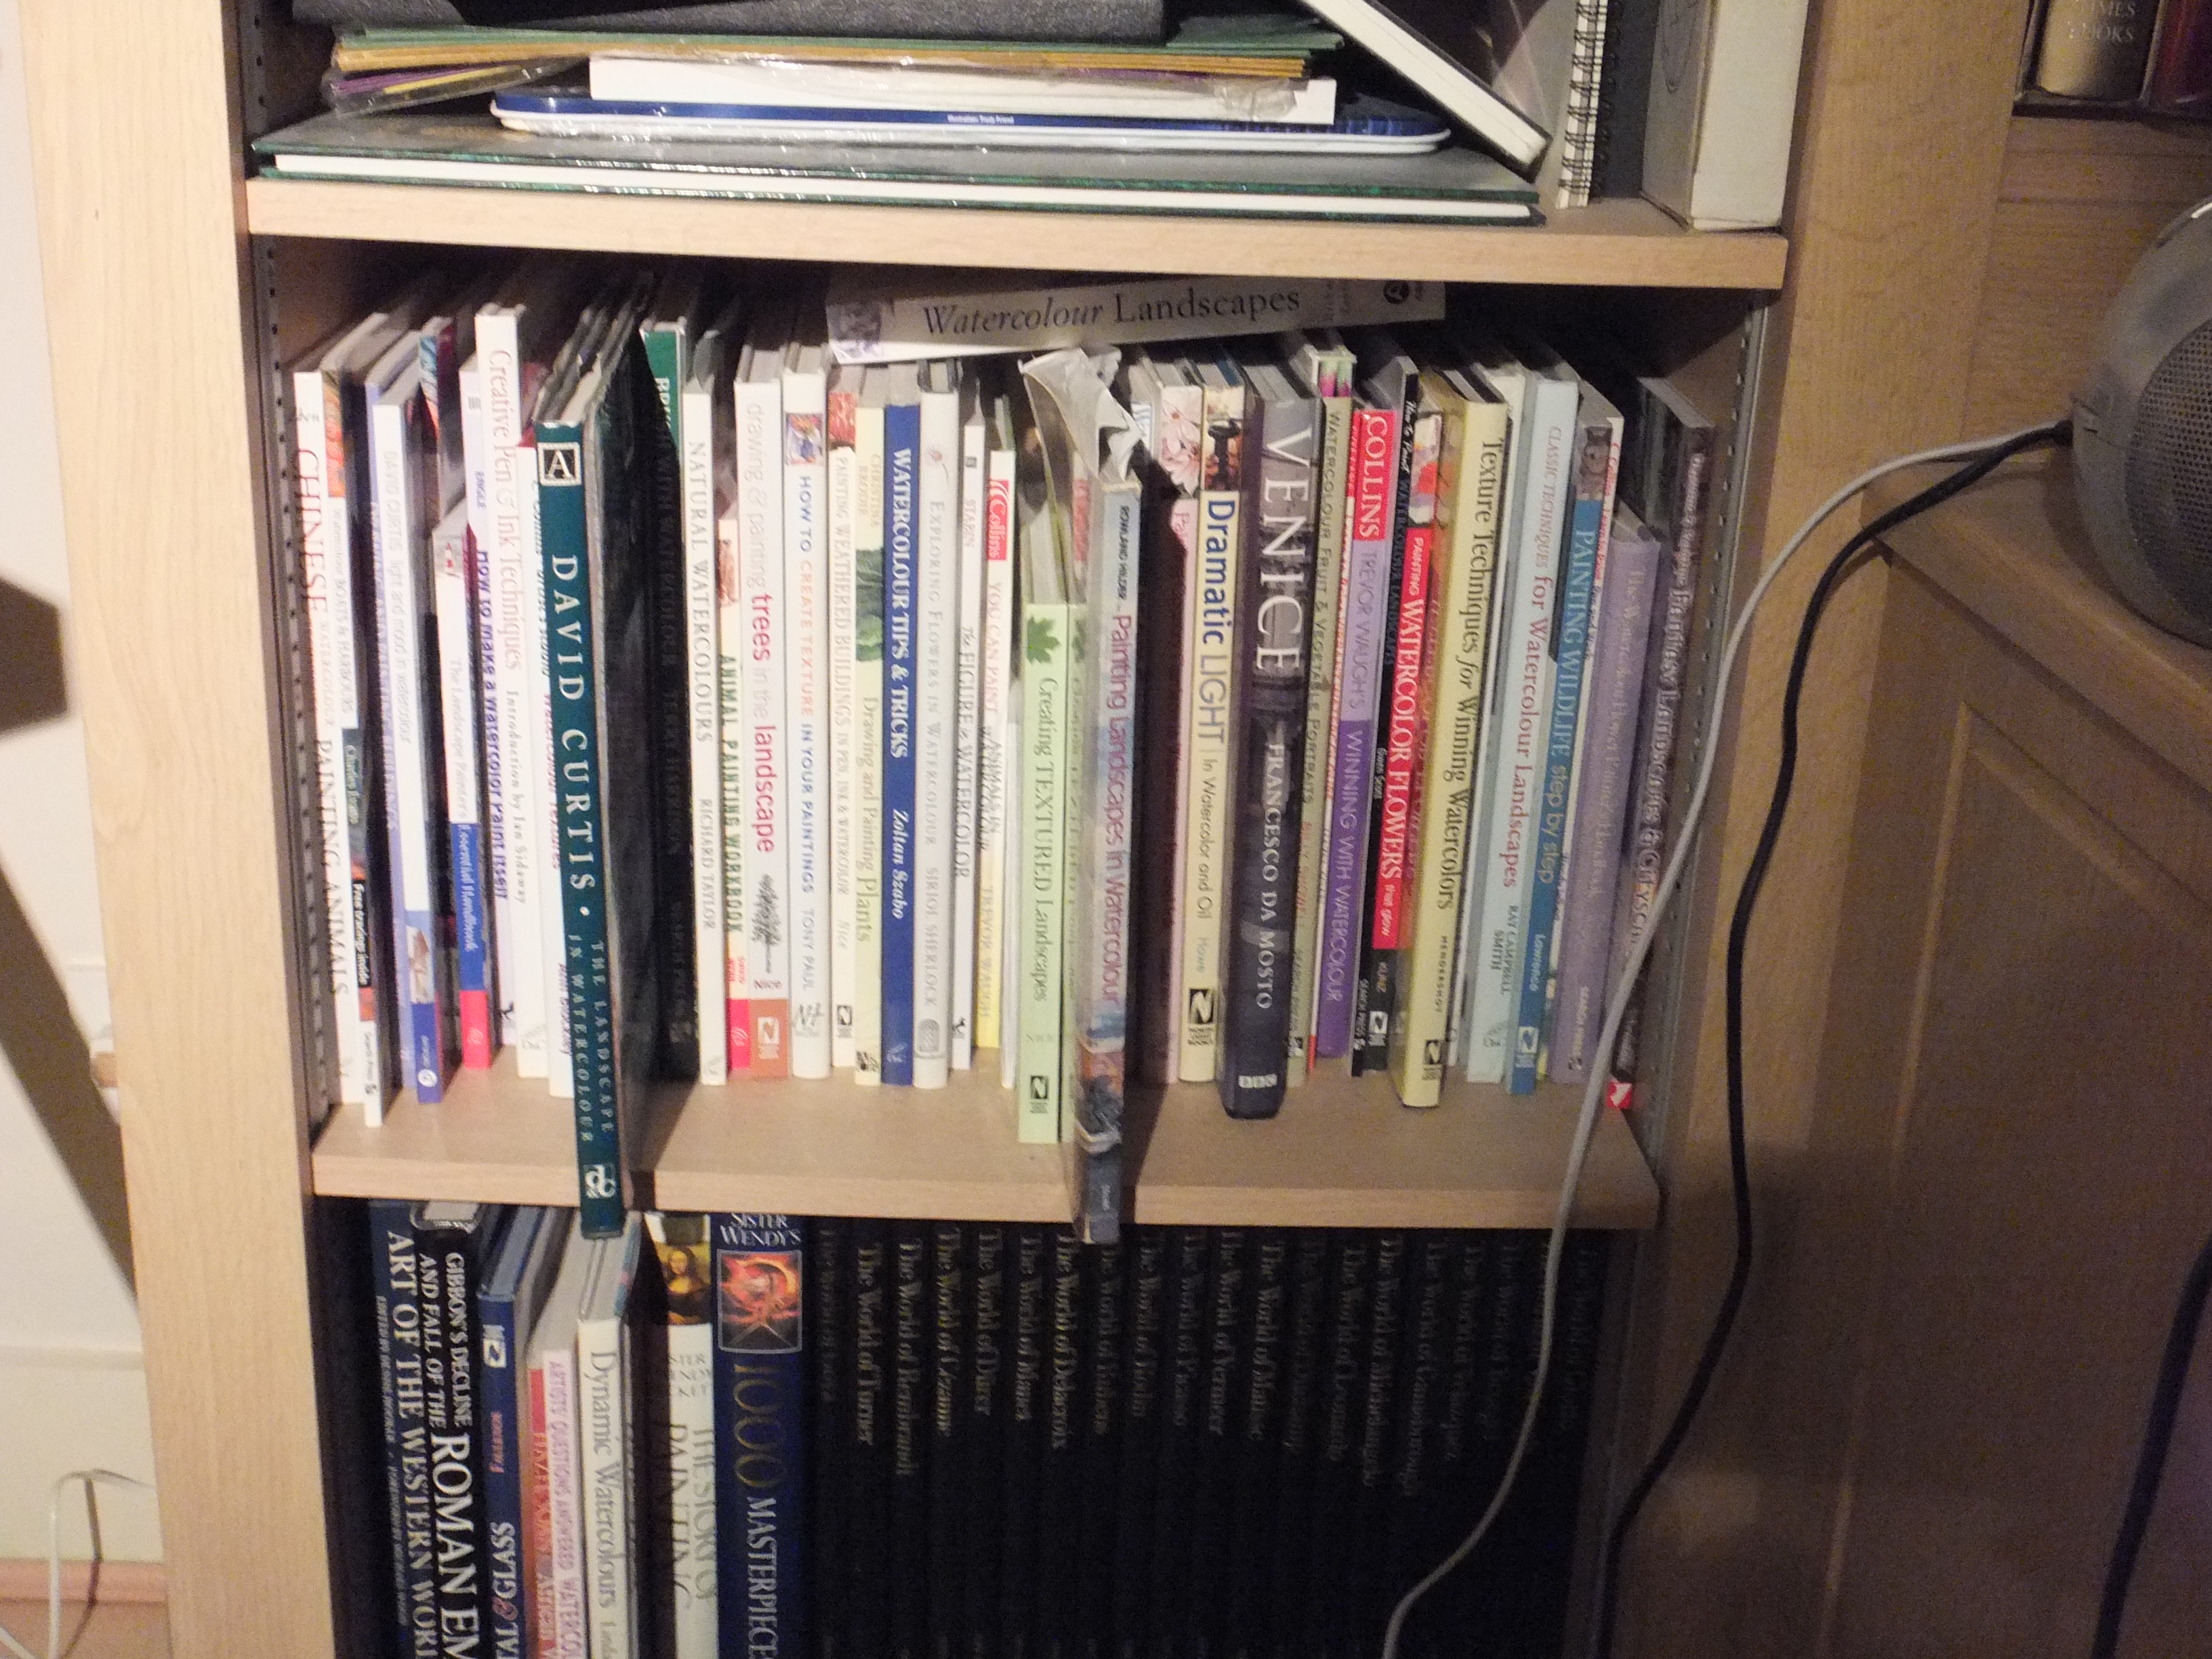 Some of my reference books